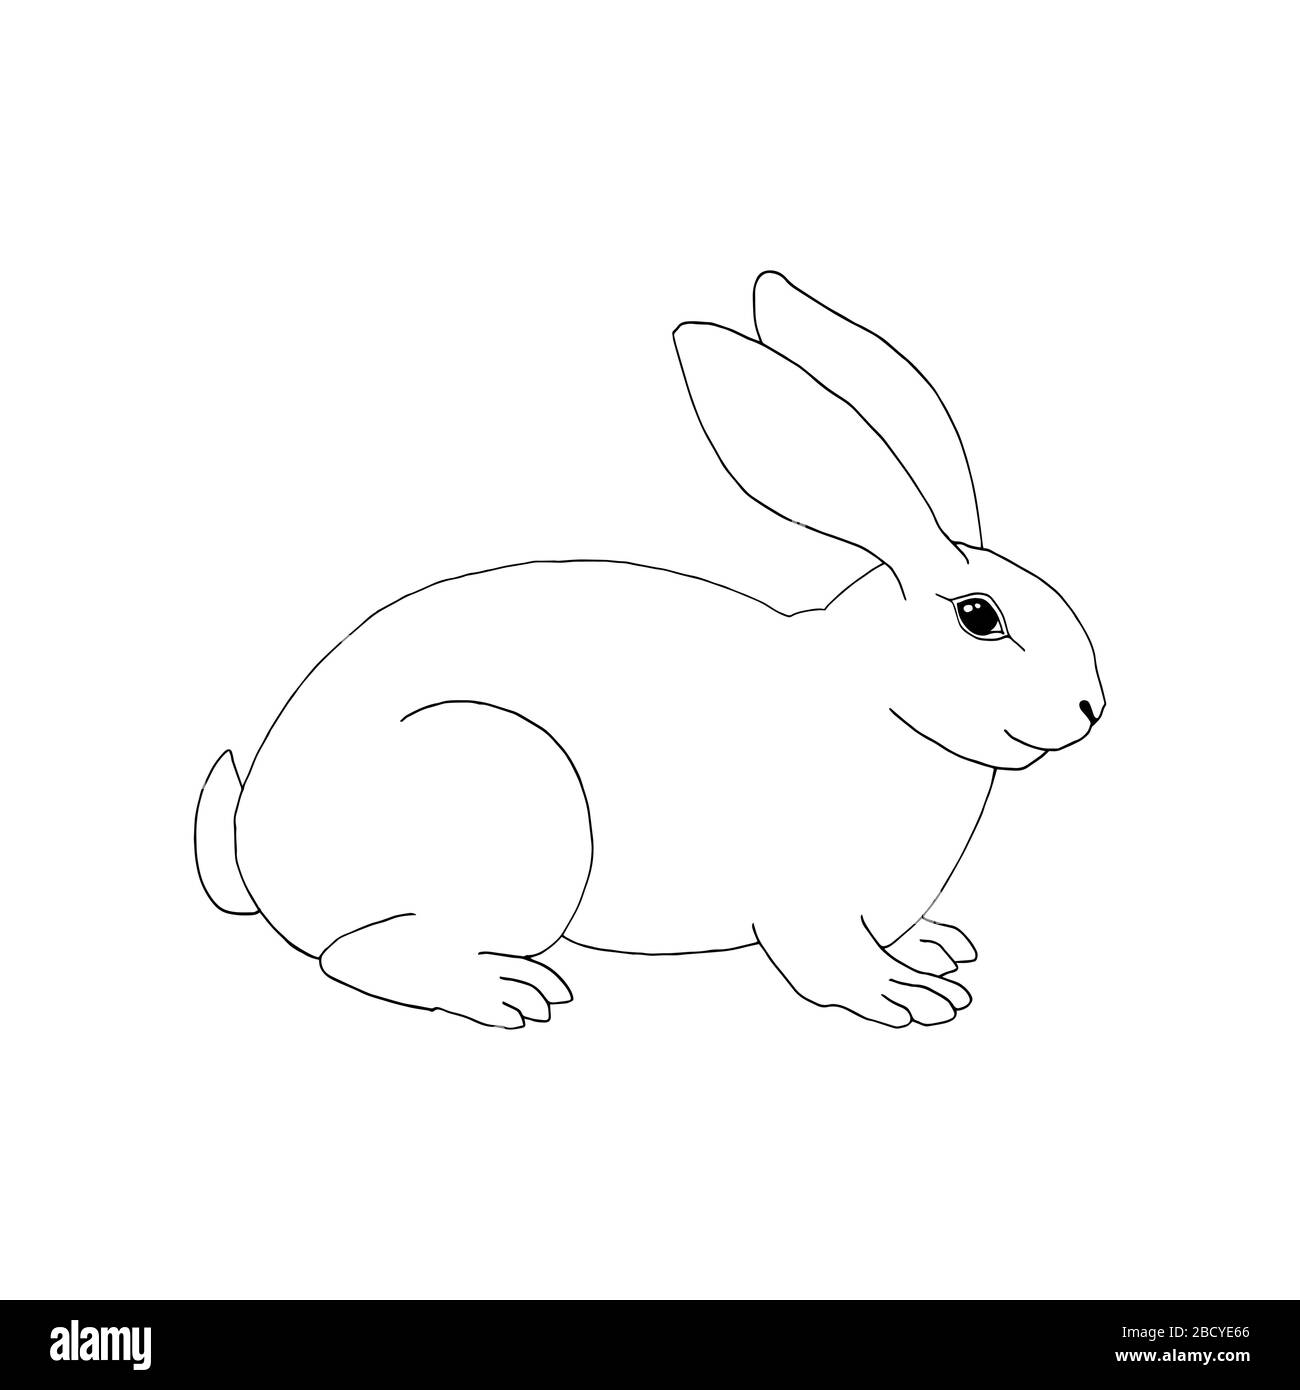 Rabbit Drawing  How To Draw A Rabbit Step By Step